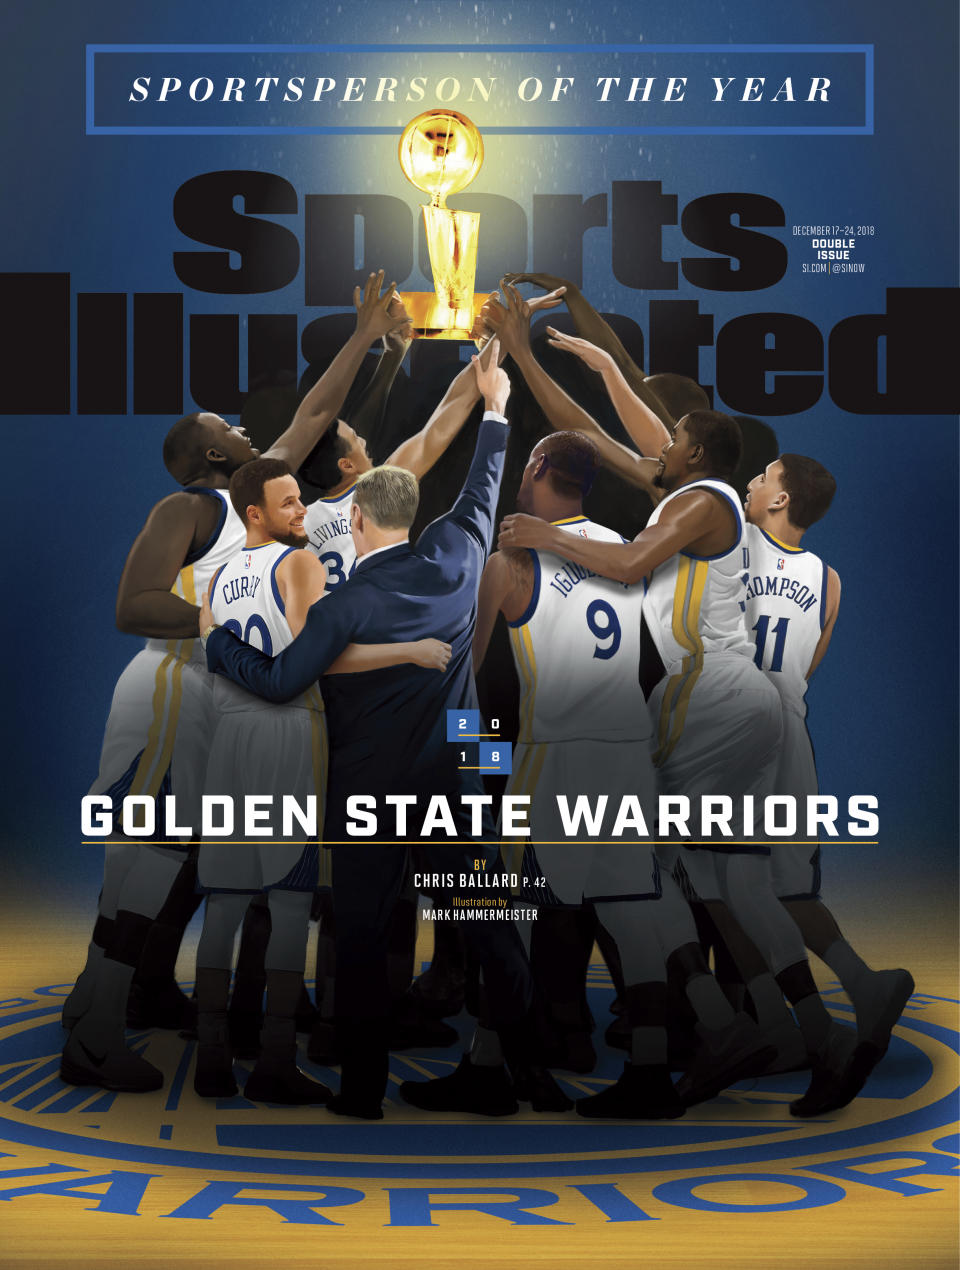 This image provided by Sports Illustrated shows the cover of the Dec. 17-24, 2018, issue featuring the Sportsperson of the Year, the Golden State Warriors NBA basketball team. The three-time NBA champion Warriors are the fourth team to receive the honor, the magazine announced Monday, Dec. 10, 2018. (Mark Hammermeister/Courtesy of Sports Illustrated via AP)